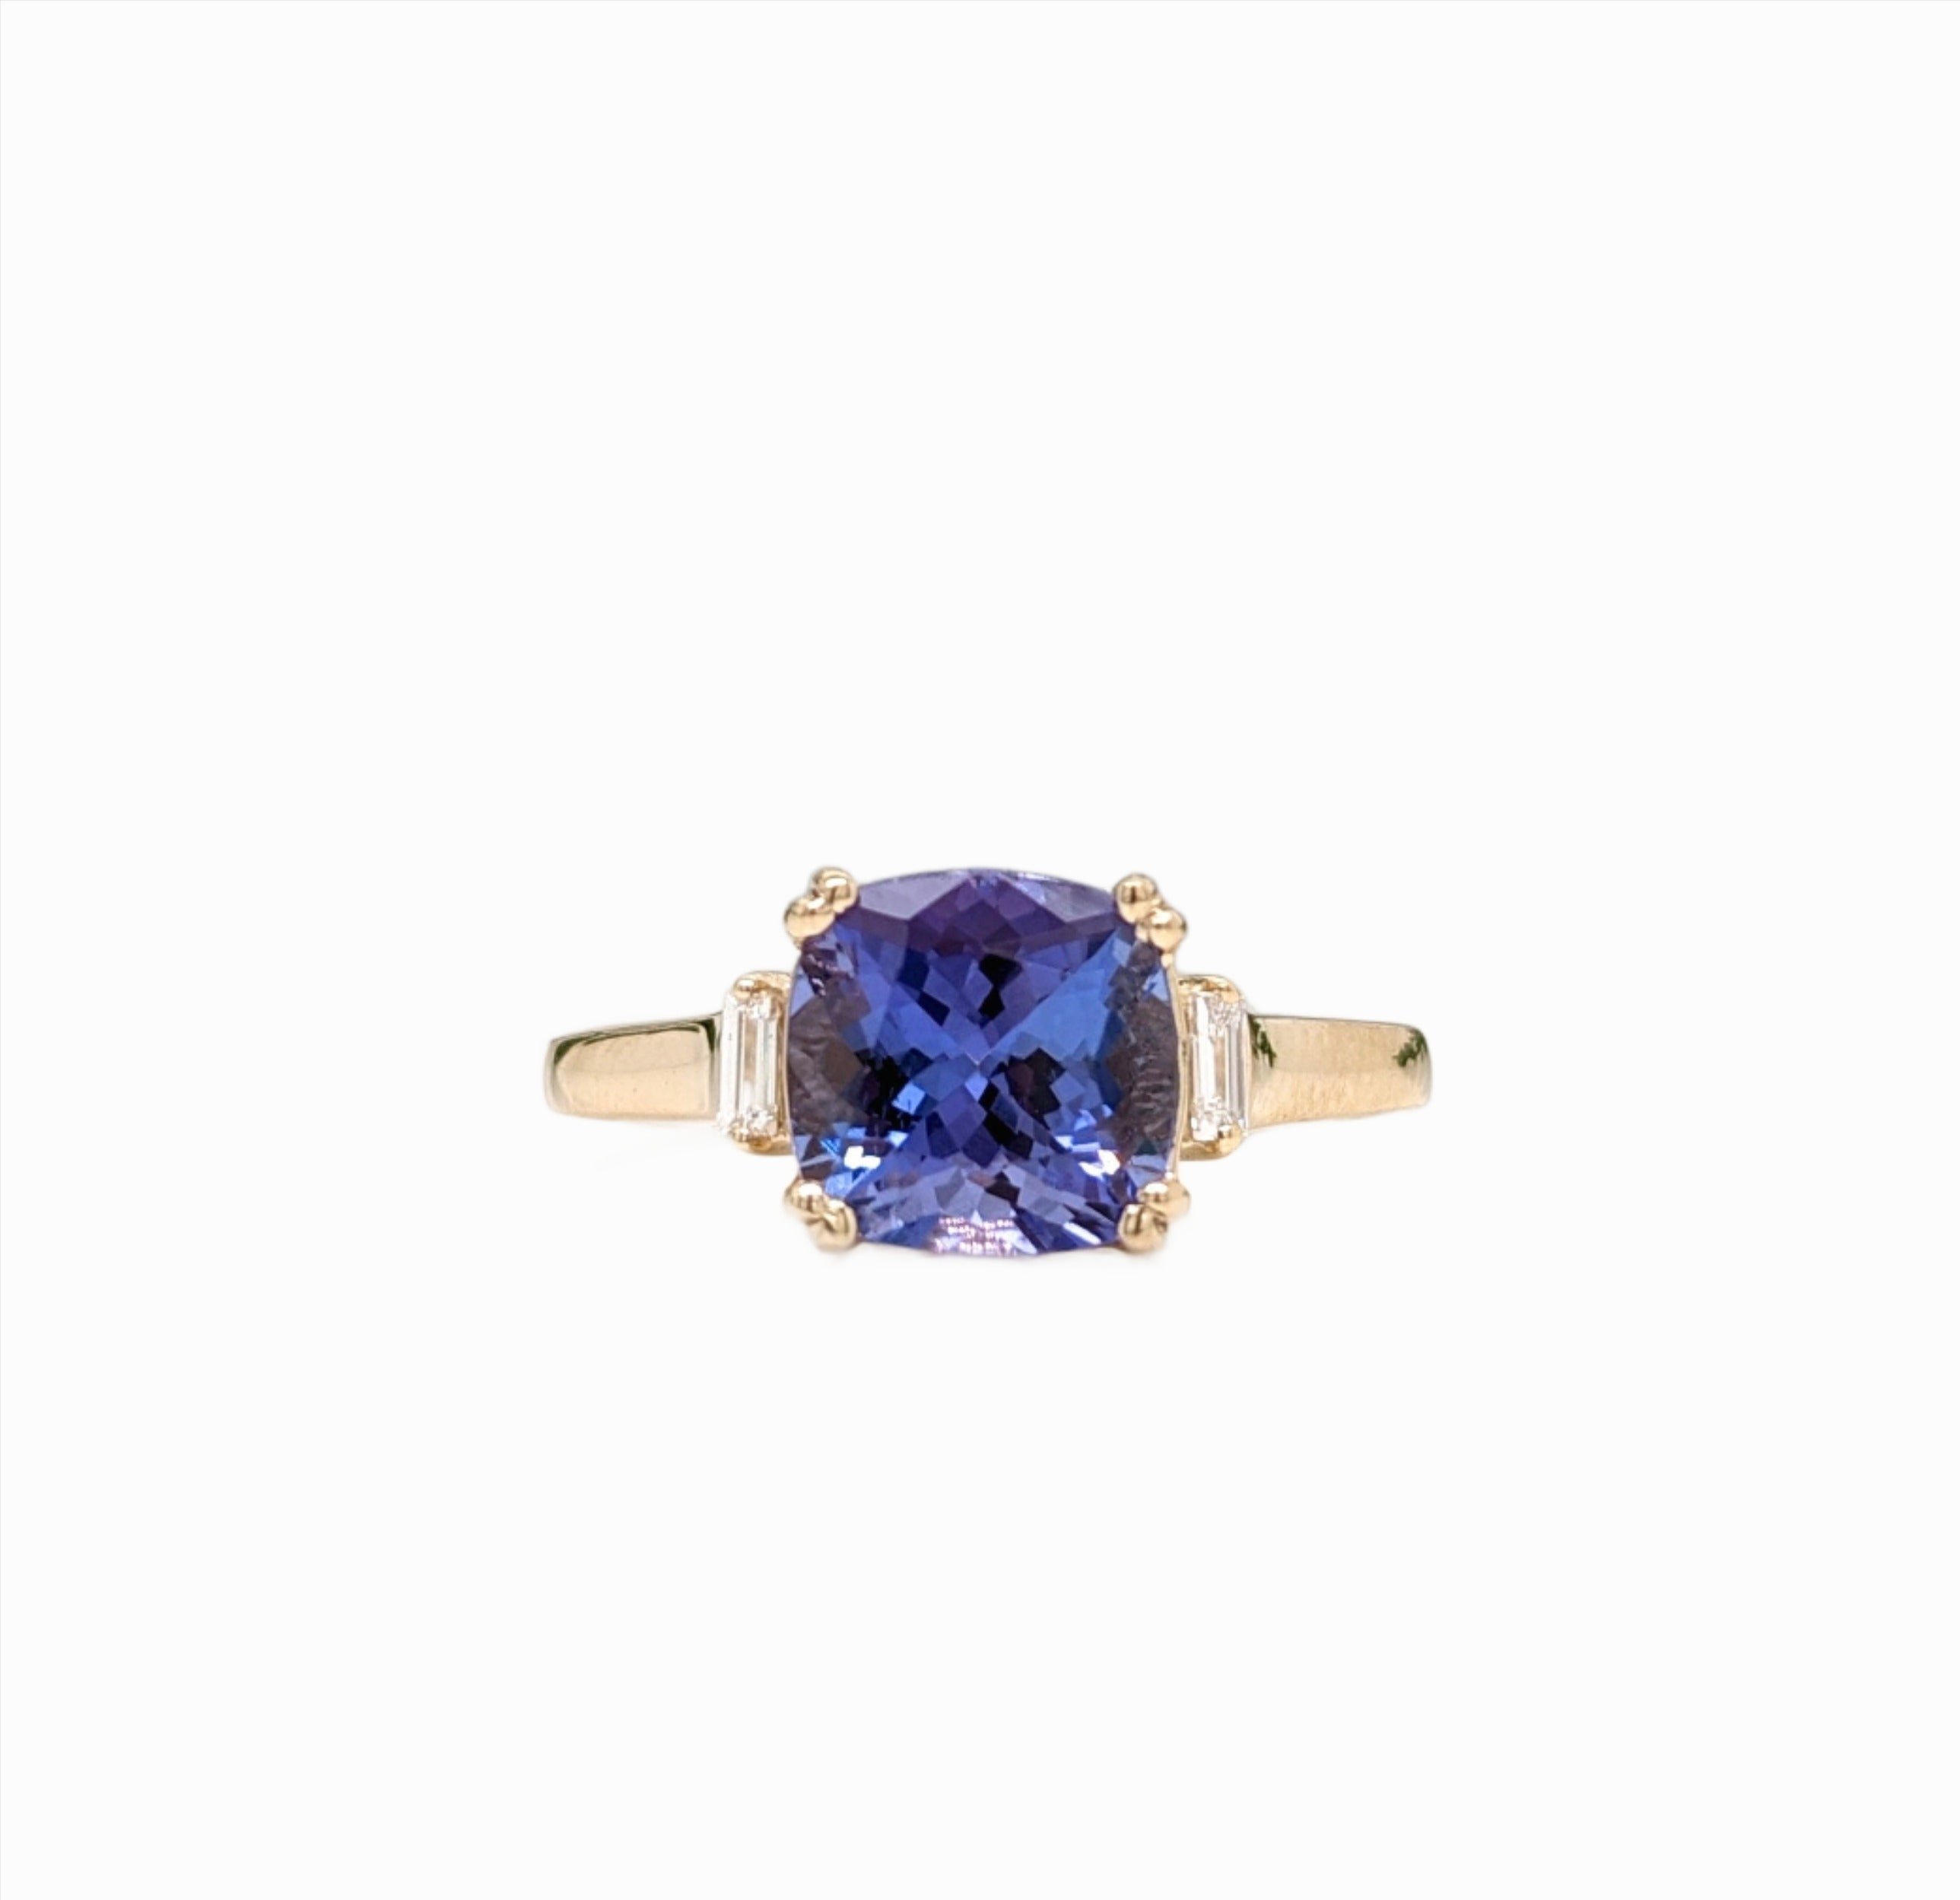 AAA Tanzanite Ring in 14K Yellow Gold w Baguette Diamond Accents | 2.27cts Cushion 8mm | Purple and Red Flashes | December Birthstone Ring